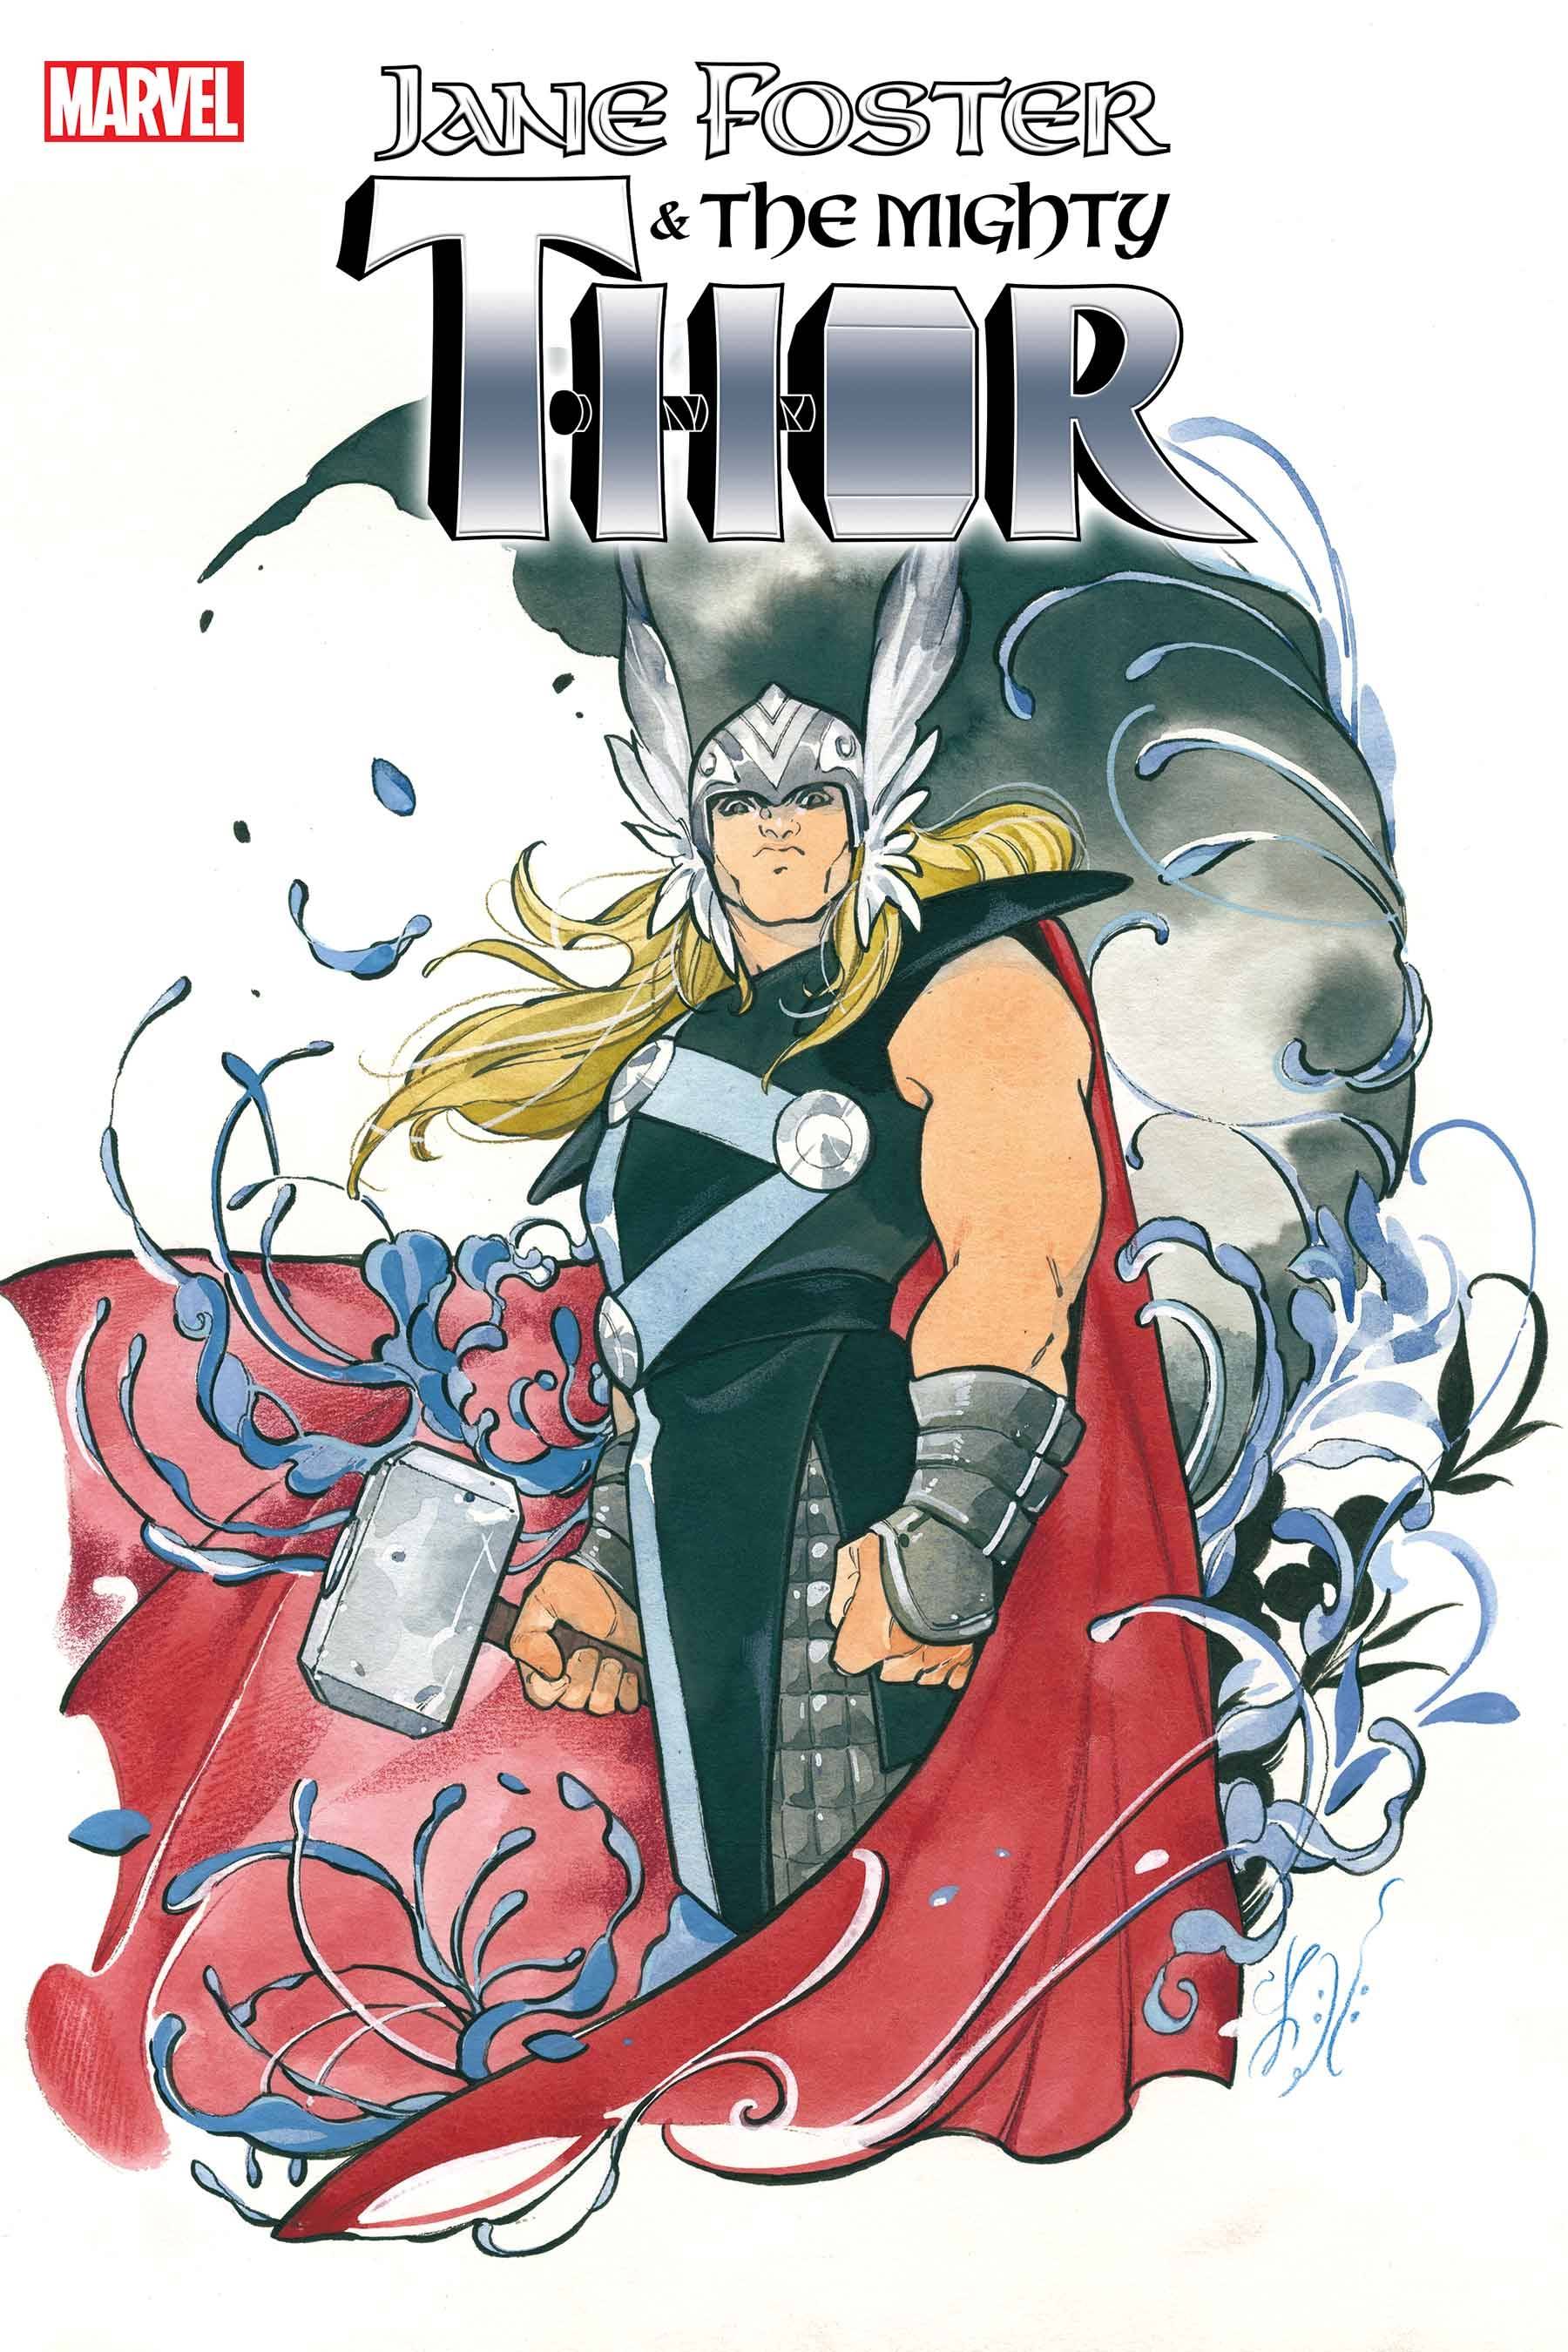 08/10/2022 JANE FOSTER MIGHTY THOR #3 (OF 5) MOMOKO VARIANT